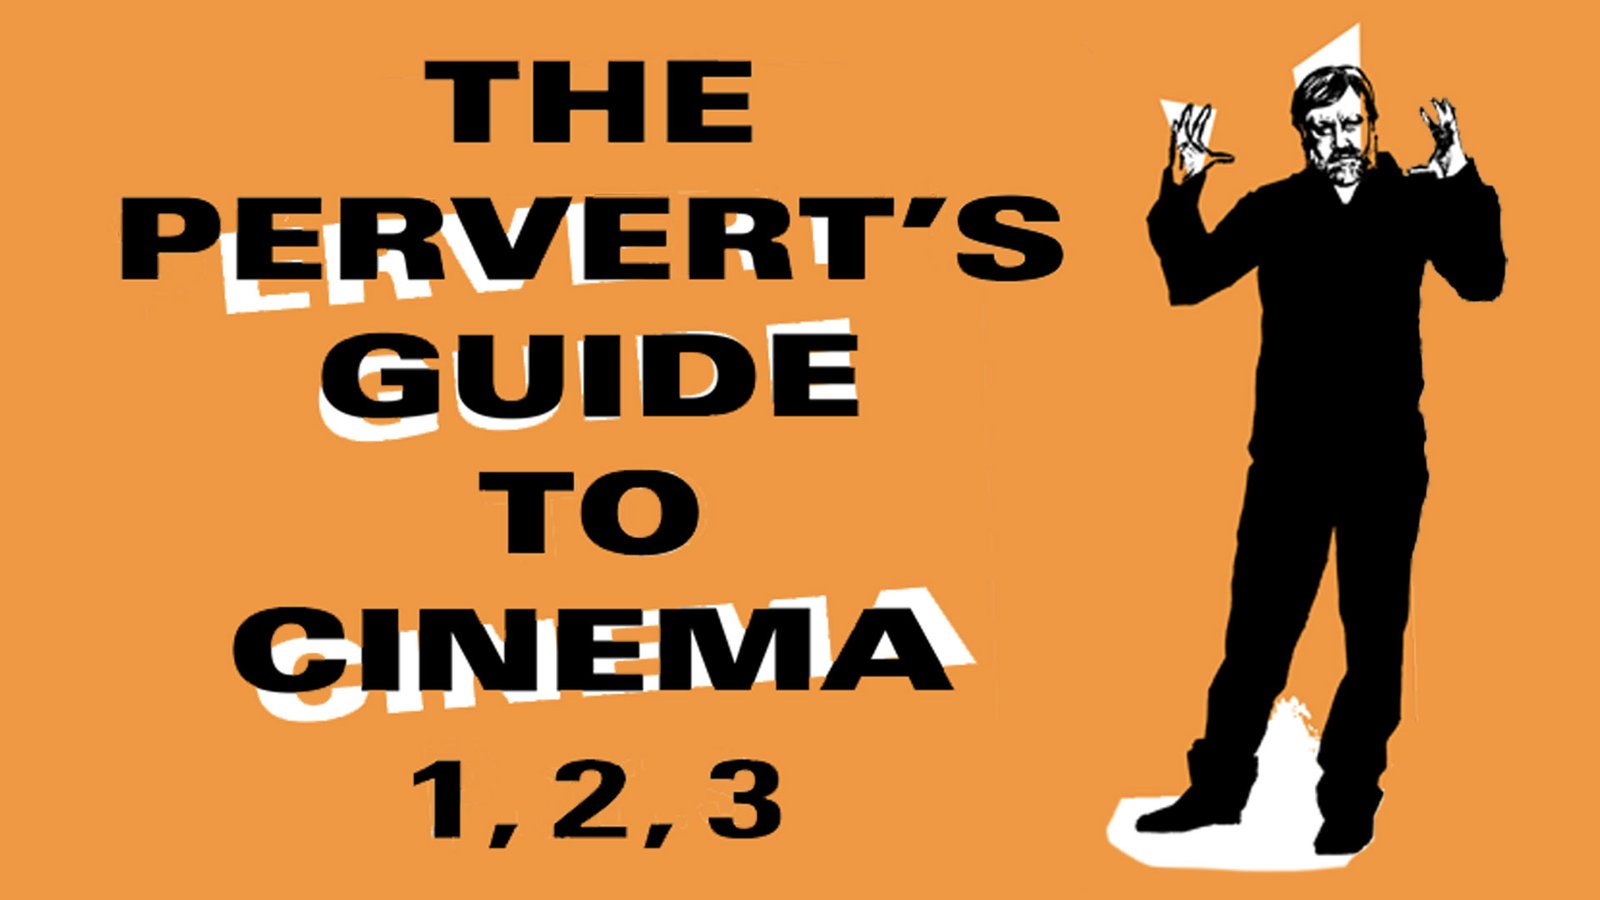 The Pervert's Guide To Cinema